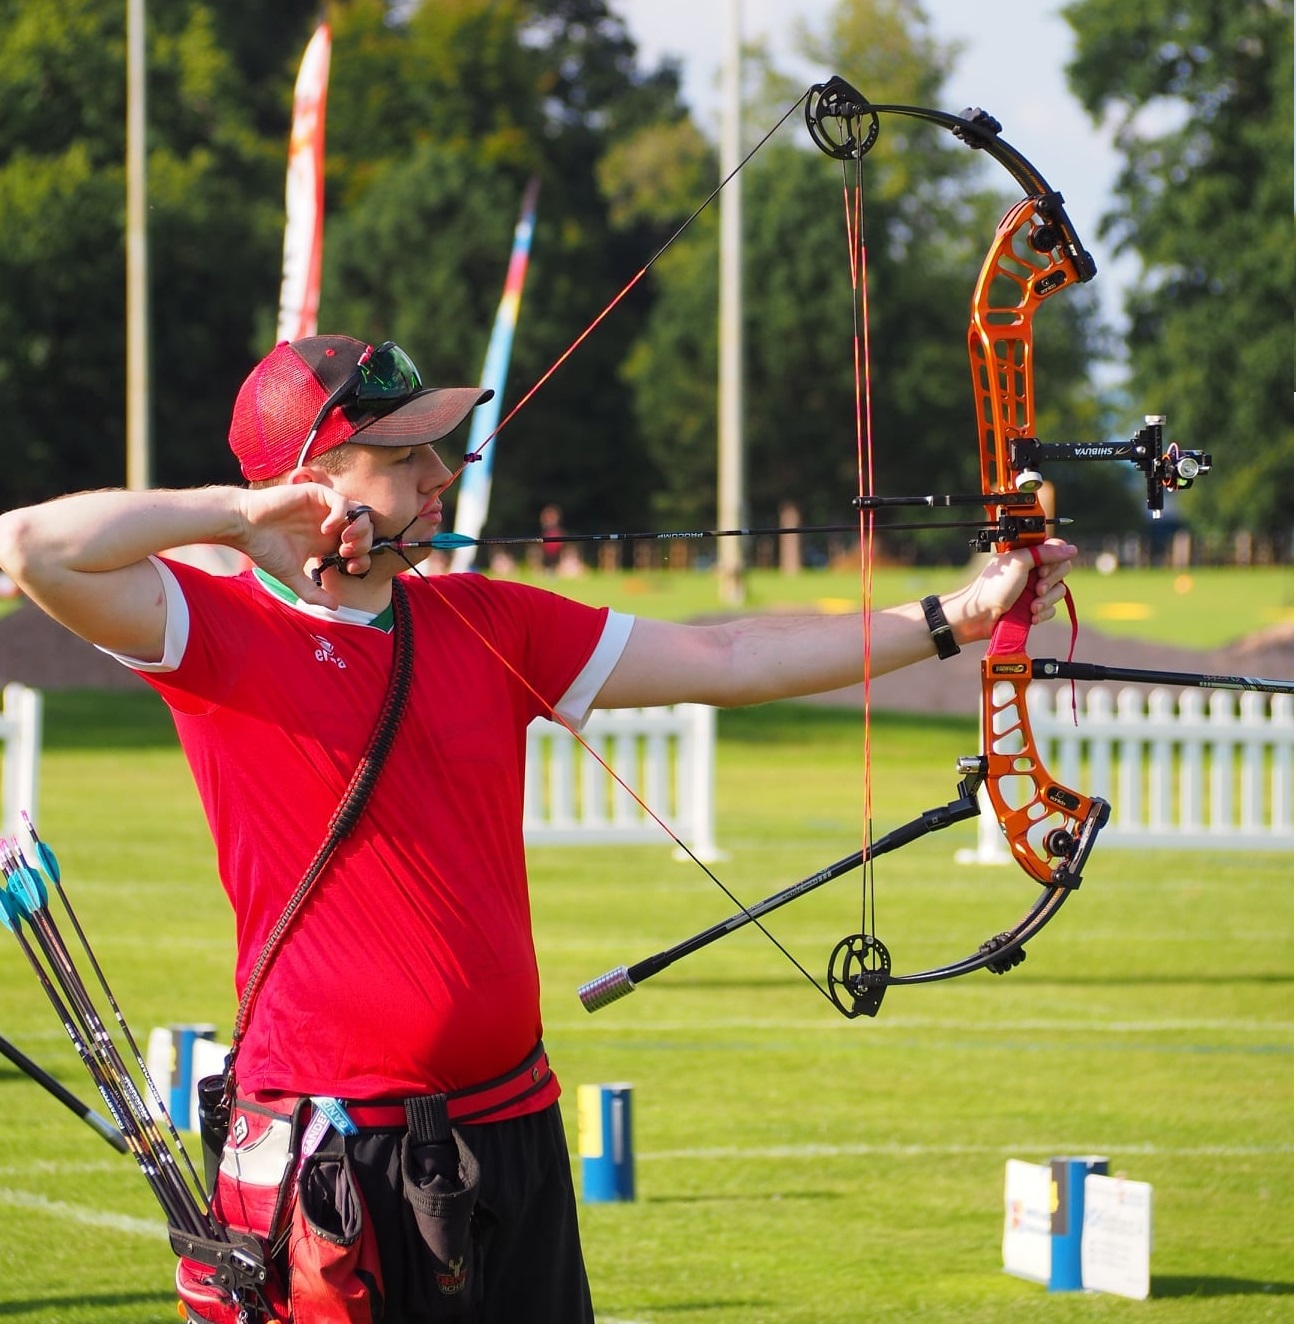 Commonwealth Archery Championships of Europe 2021 